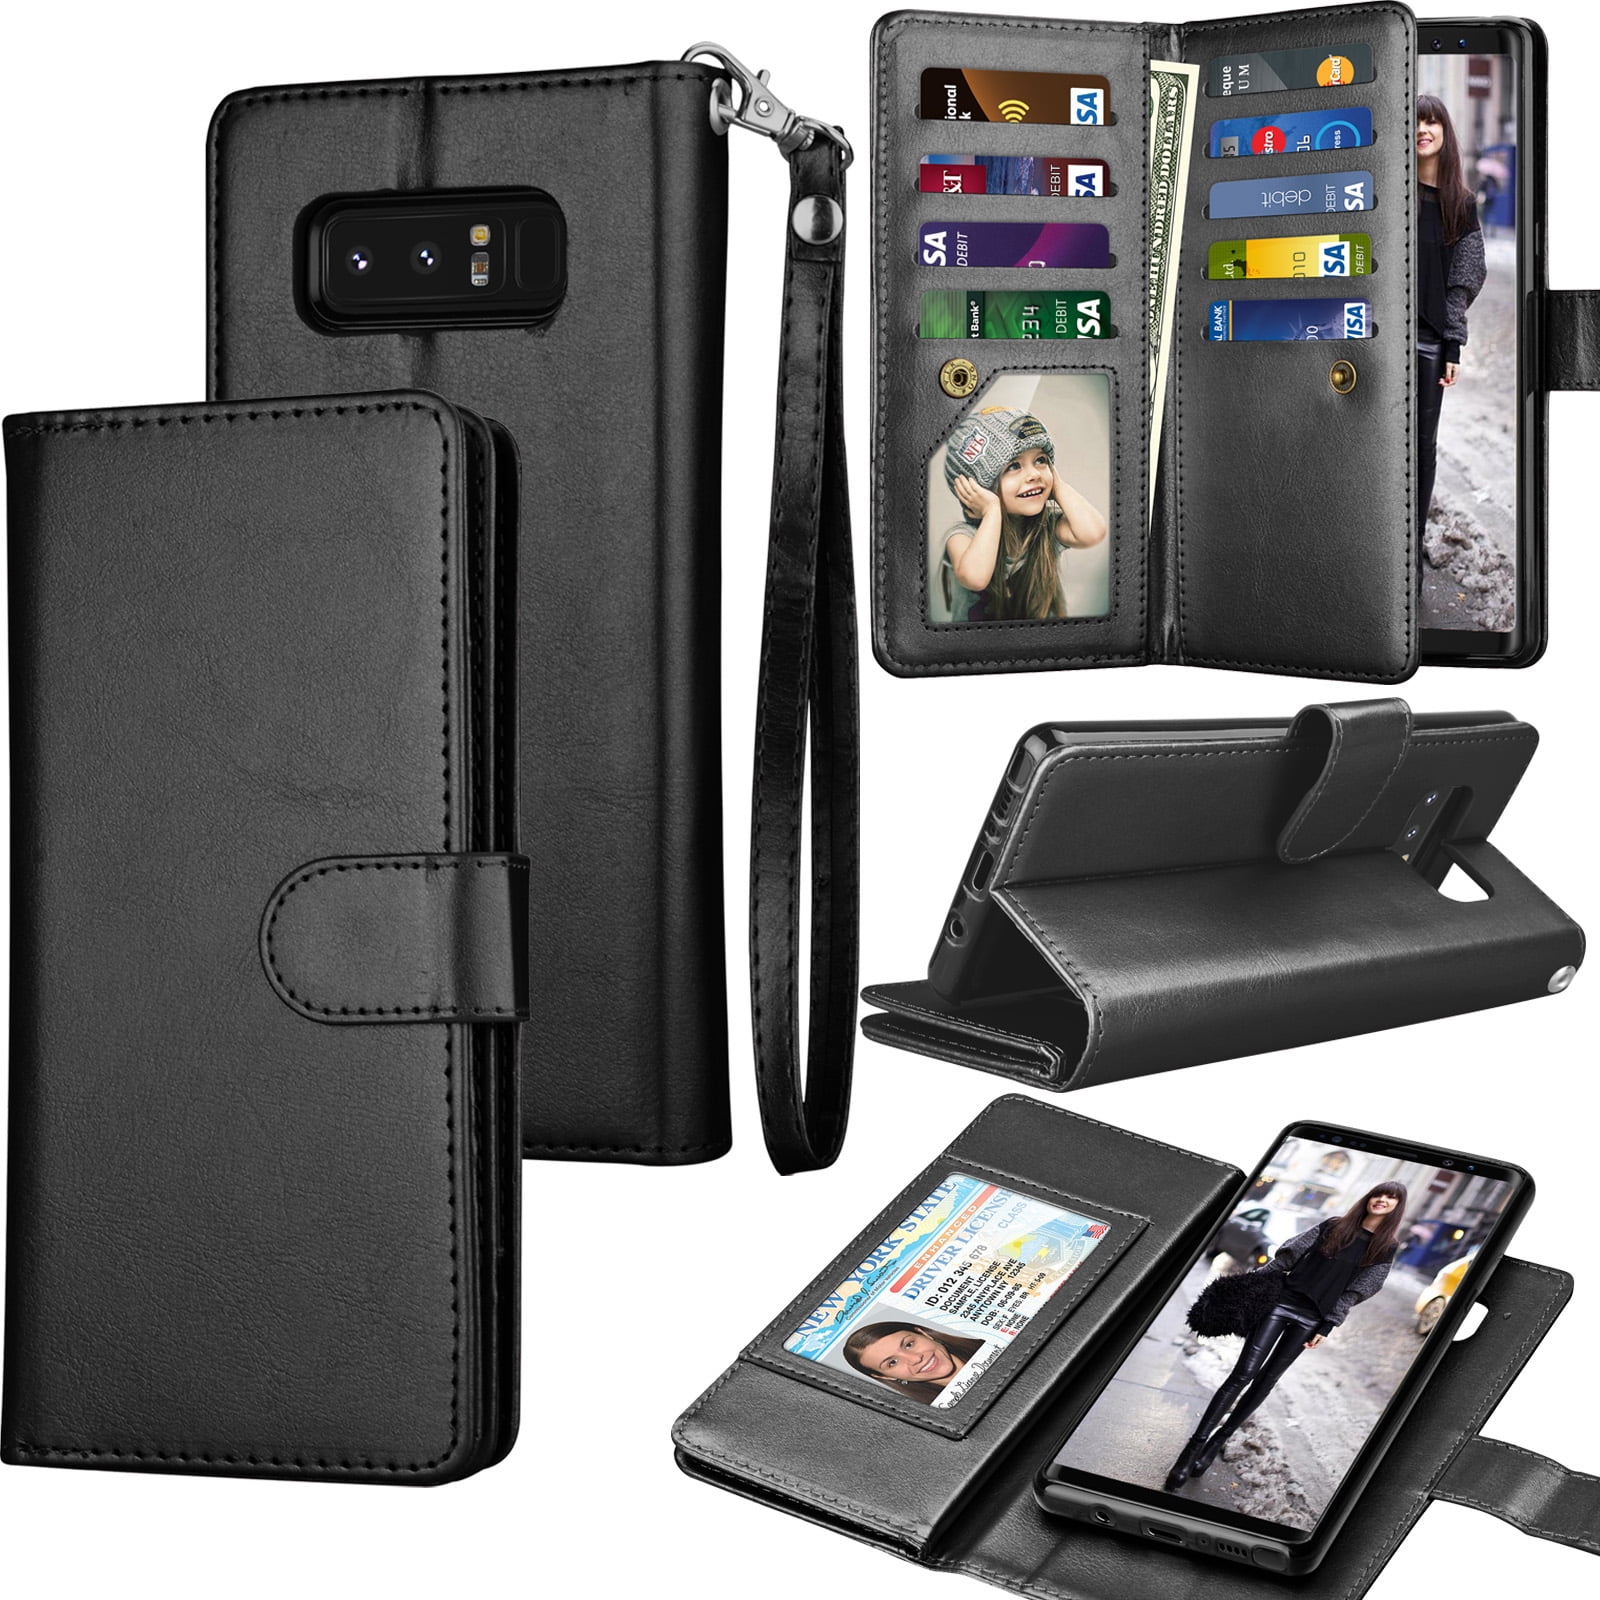 Galaxy Note 8 Case, Note 8 Case, Samsung Galaxy Note 8 PU Leather Case, Tekcoo Luxury Cash Credit Card Slots Holder Carrying Flip Cover [Detachable Magnetic Hard & Kickstand - Black - Walmart.com